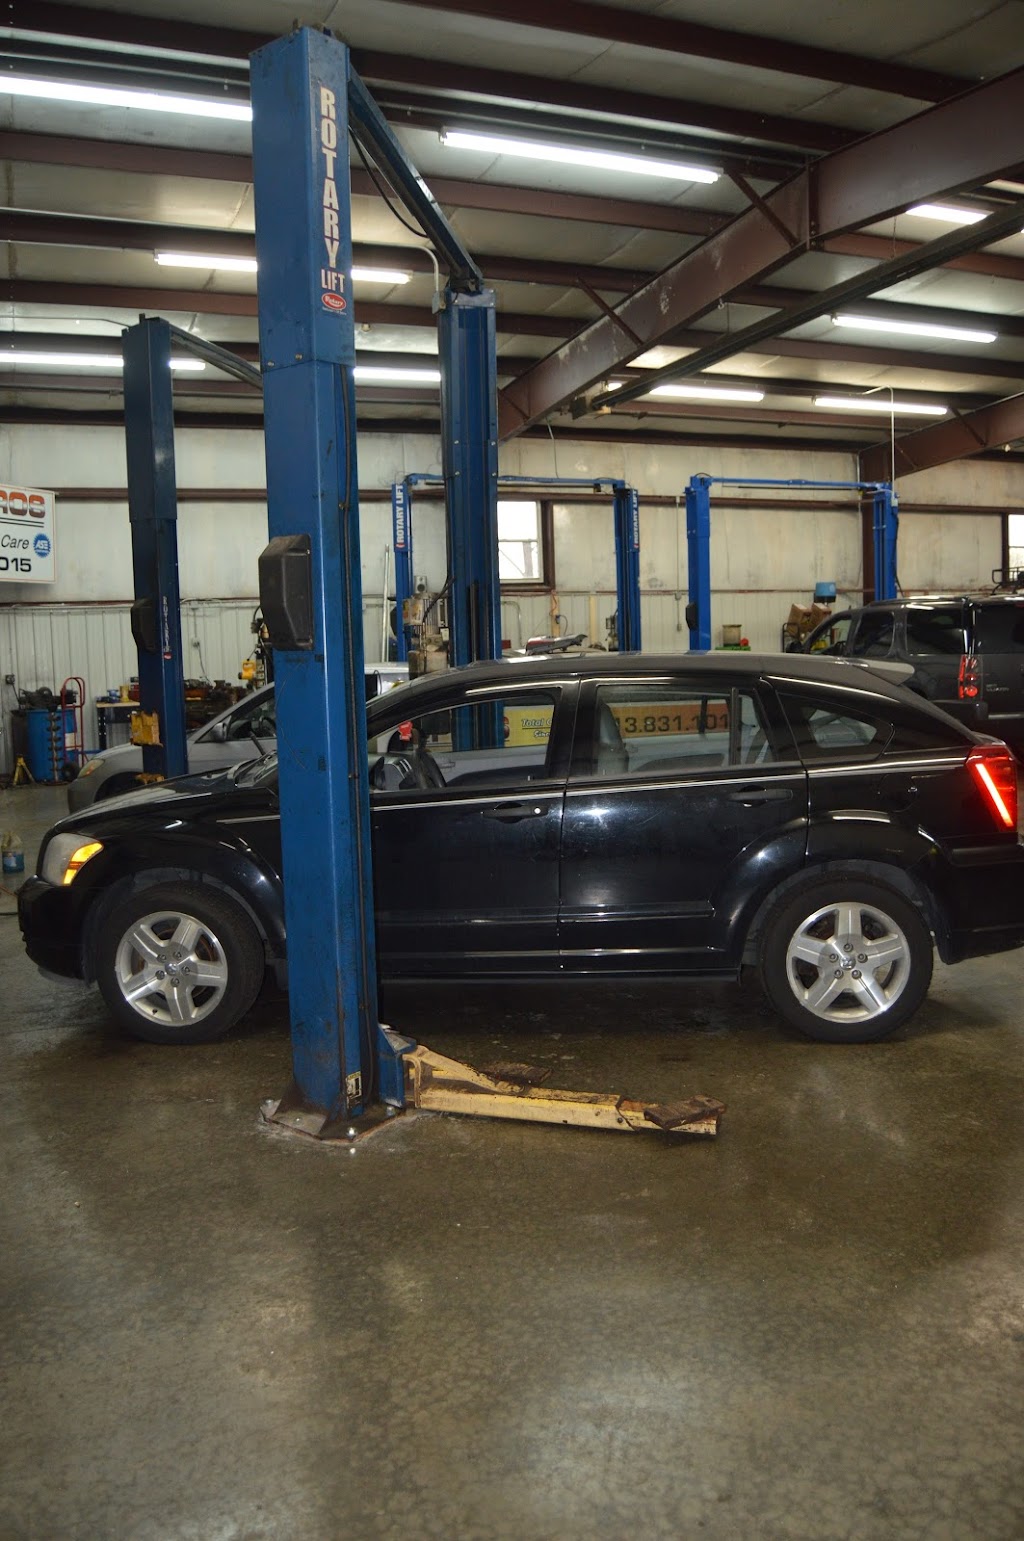 AutoPros Milford | 791 US-50, Milford, OH 45150, USA | Phone: (513) 831-1015